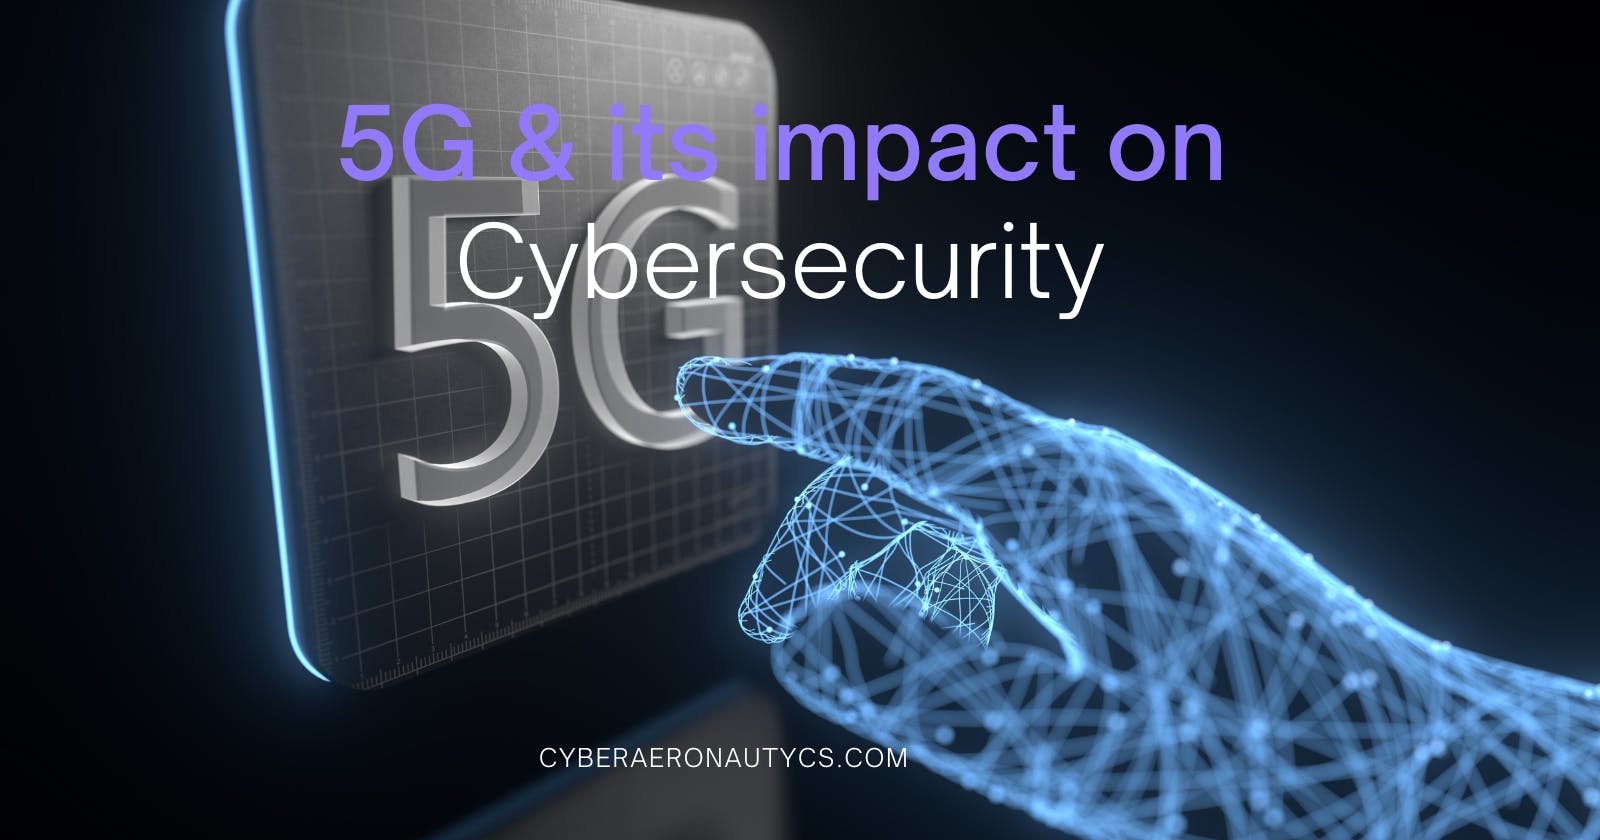 5G and its impact on cybersecurity